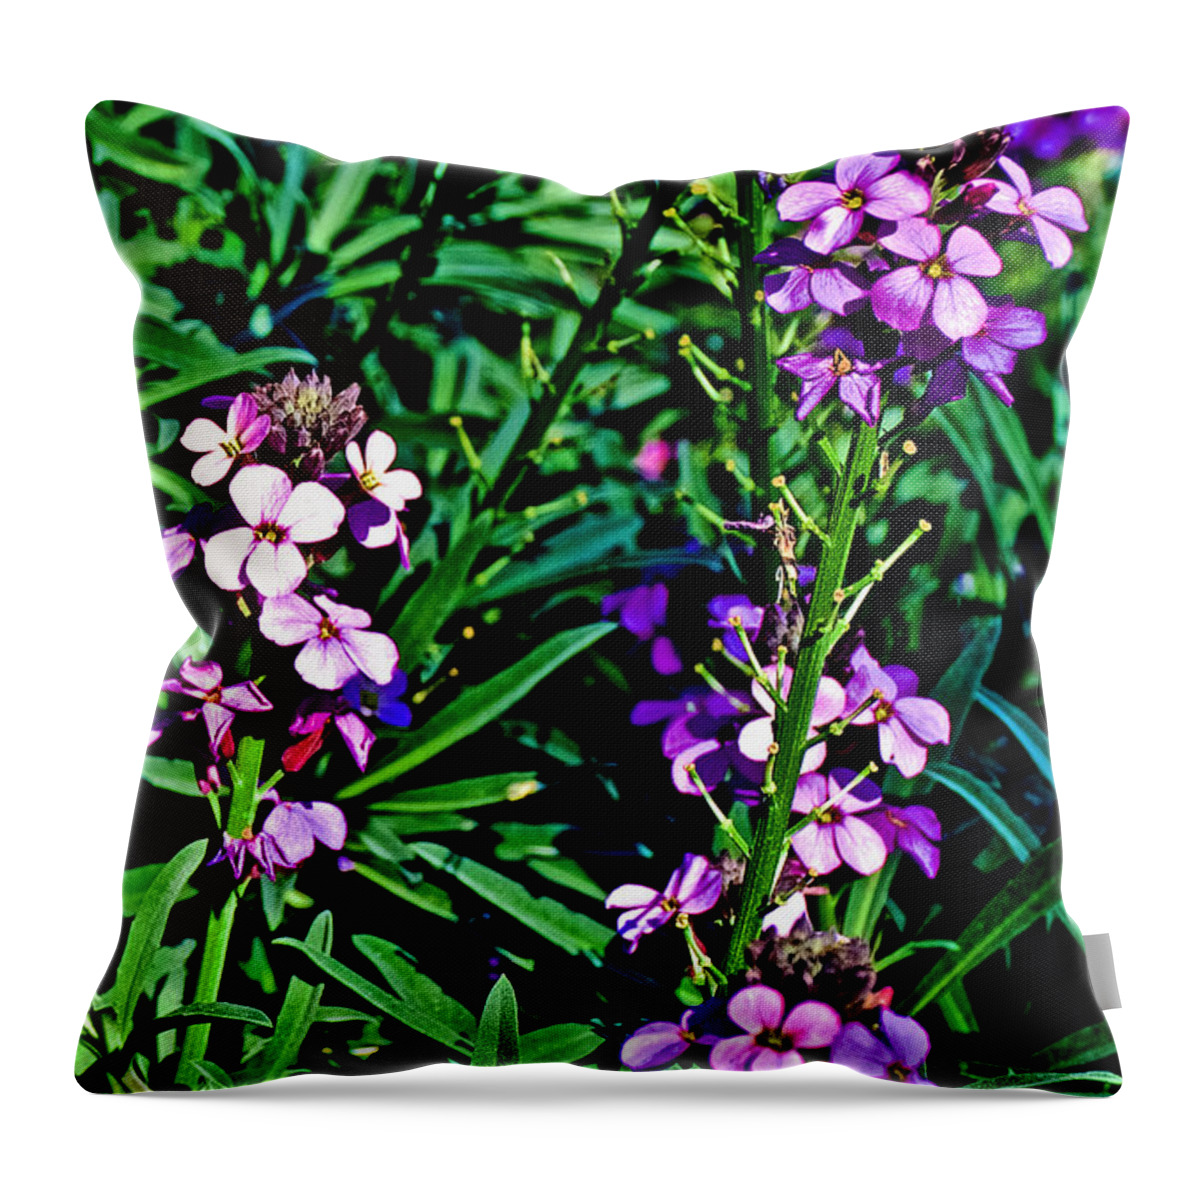 Verbena At Pilgrim Place In Claremont Throw Pillow featuring the photograph Verbena at Pilgrim Place in Claremont-California  by Ruth Hager